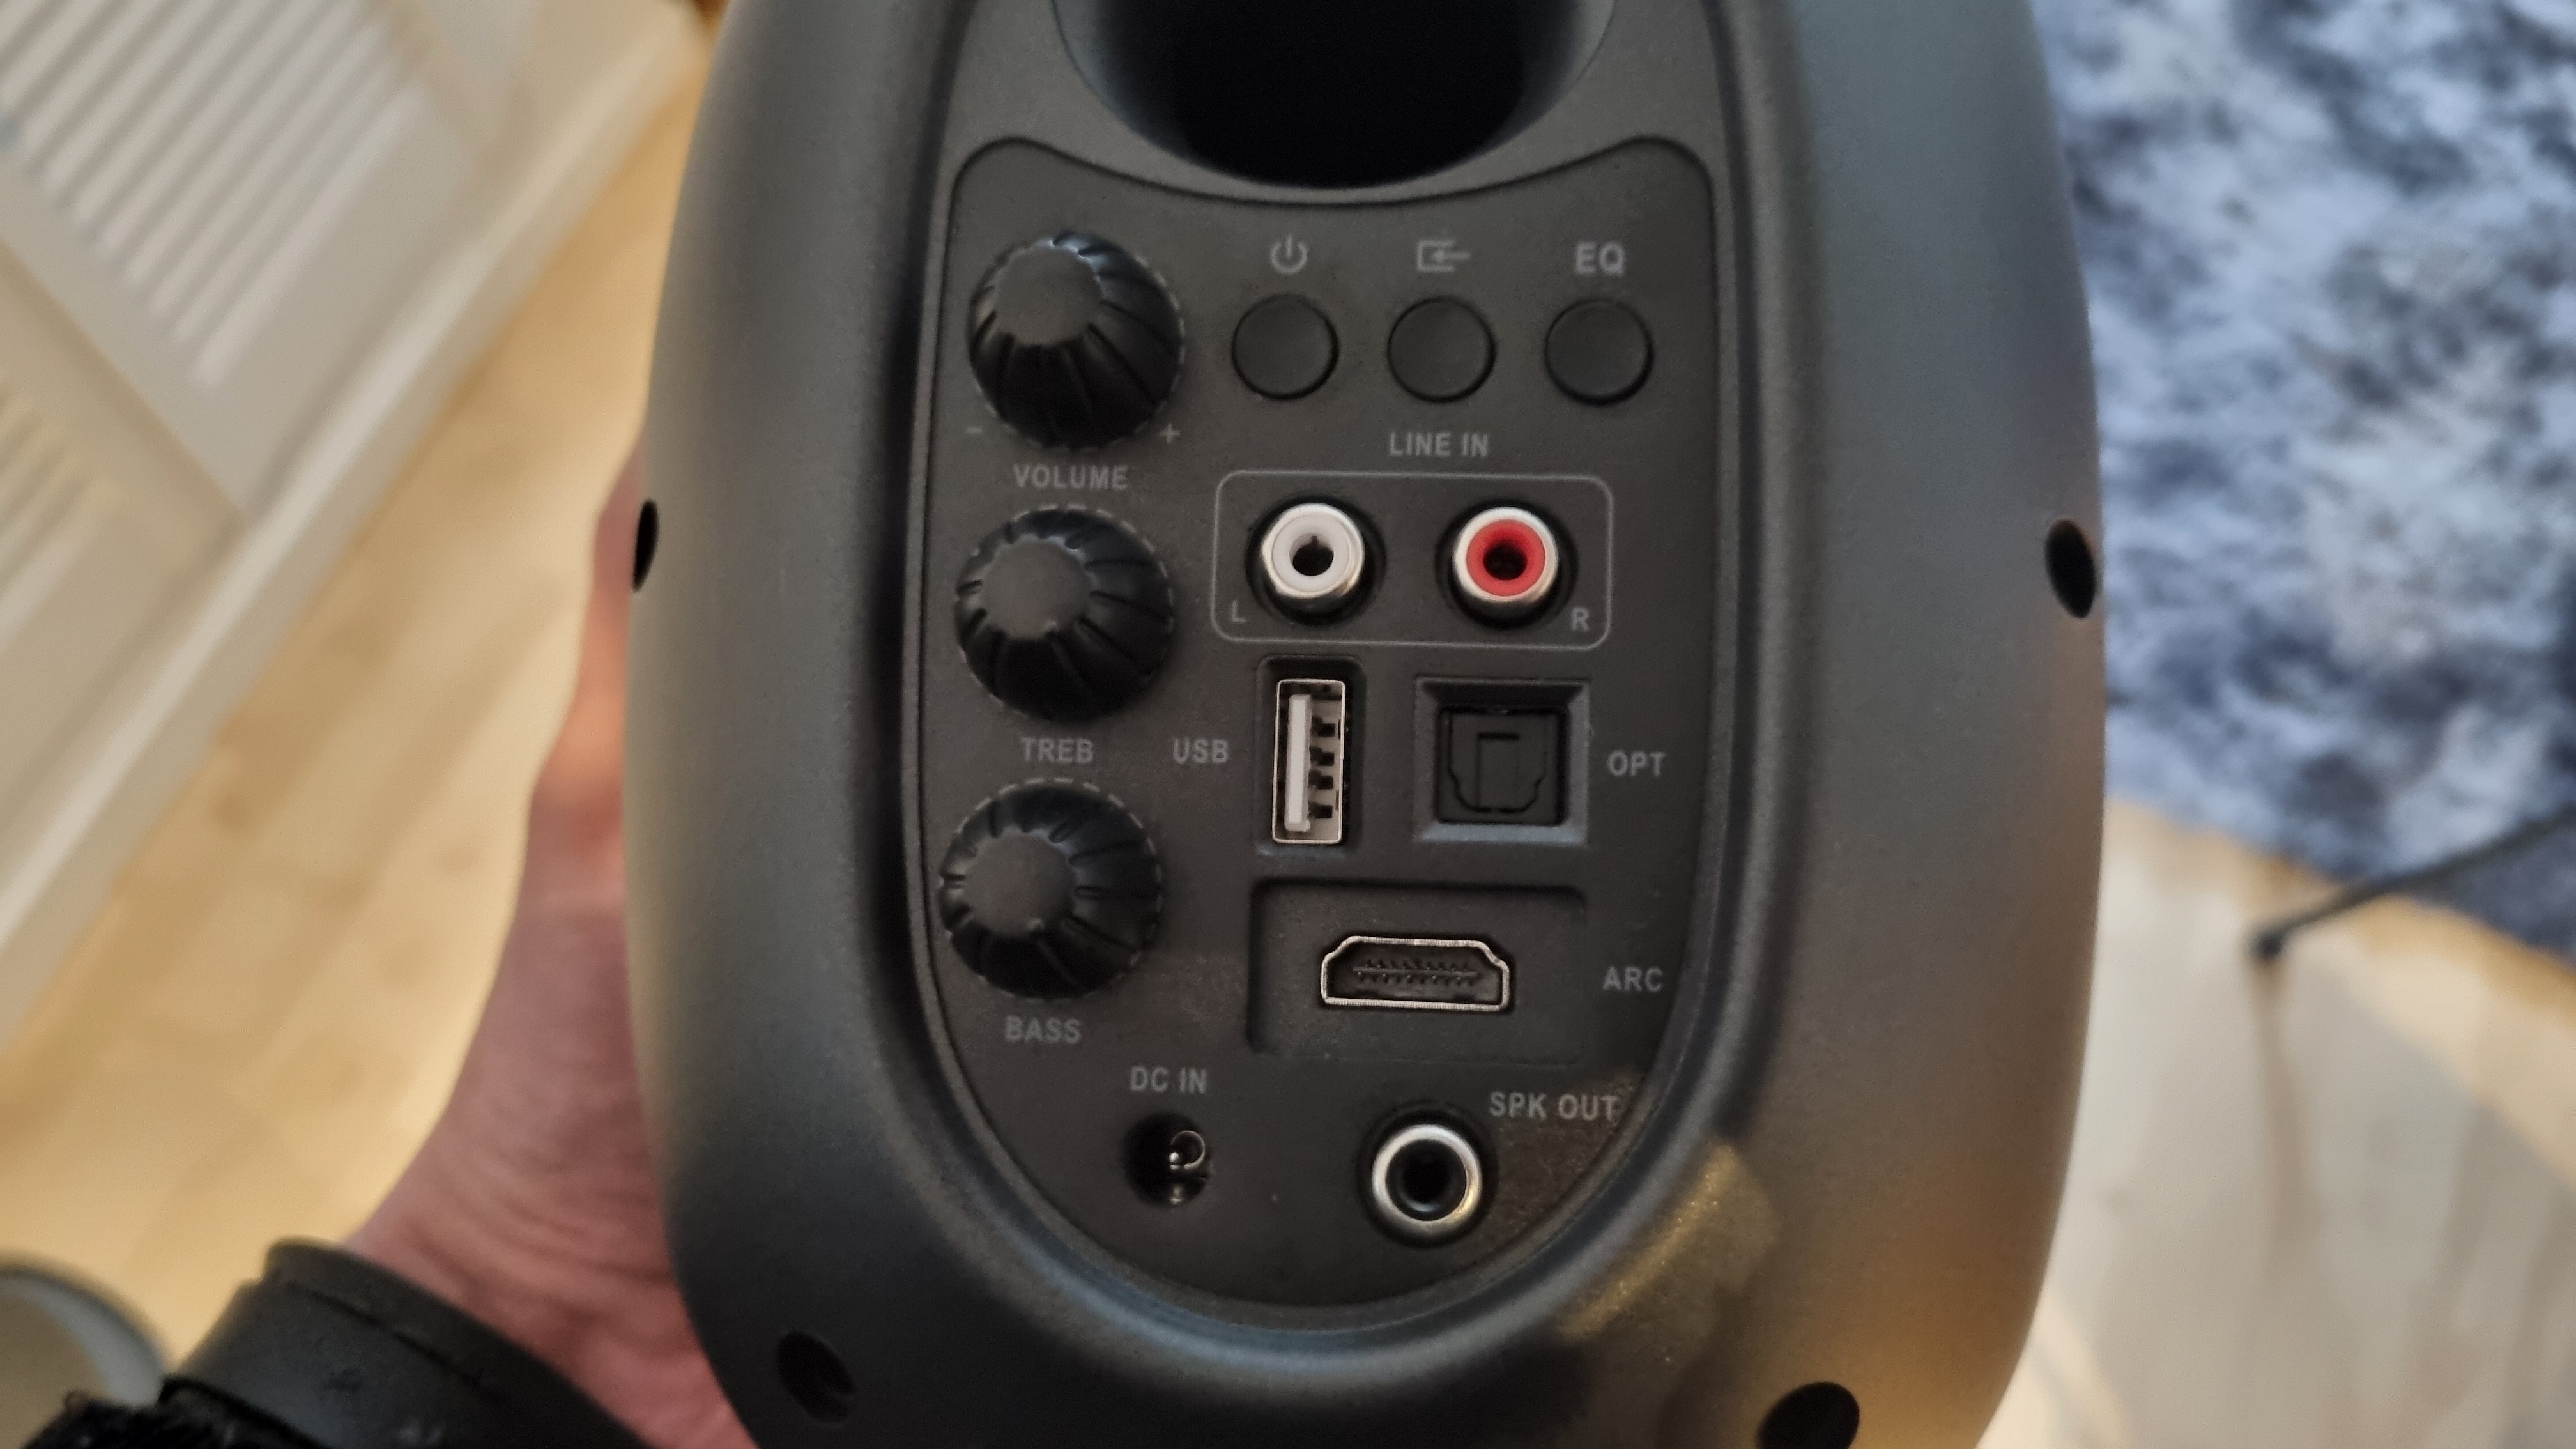 The rear of the right Majority D80 speaker, showing the inputs, rear mounted controls and connectivity options